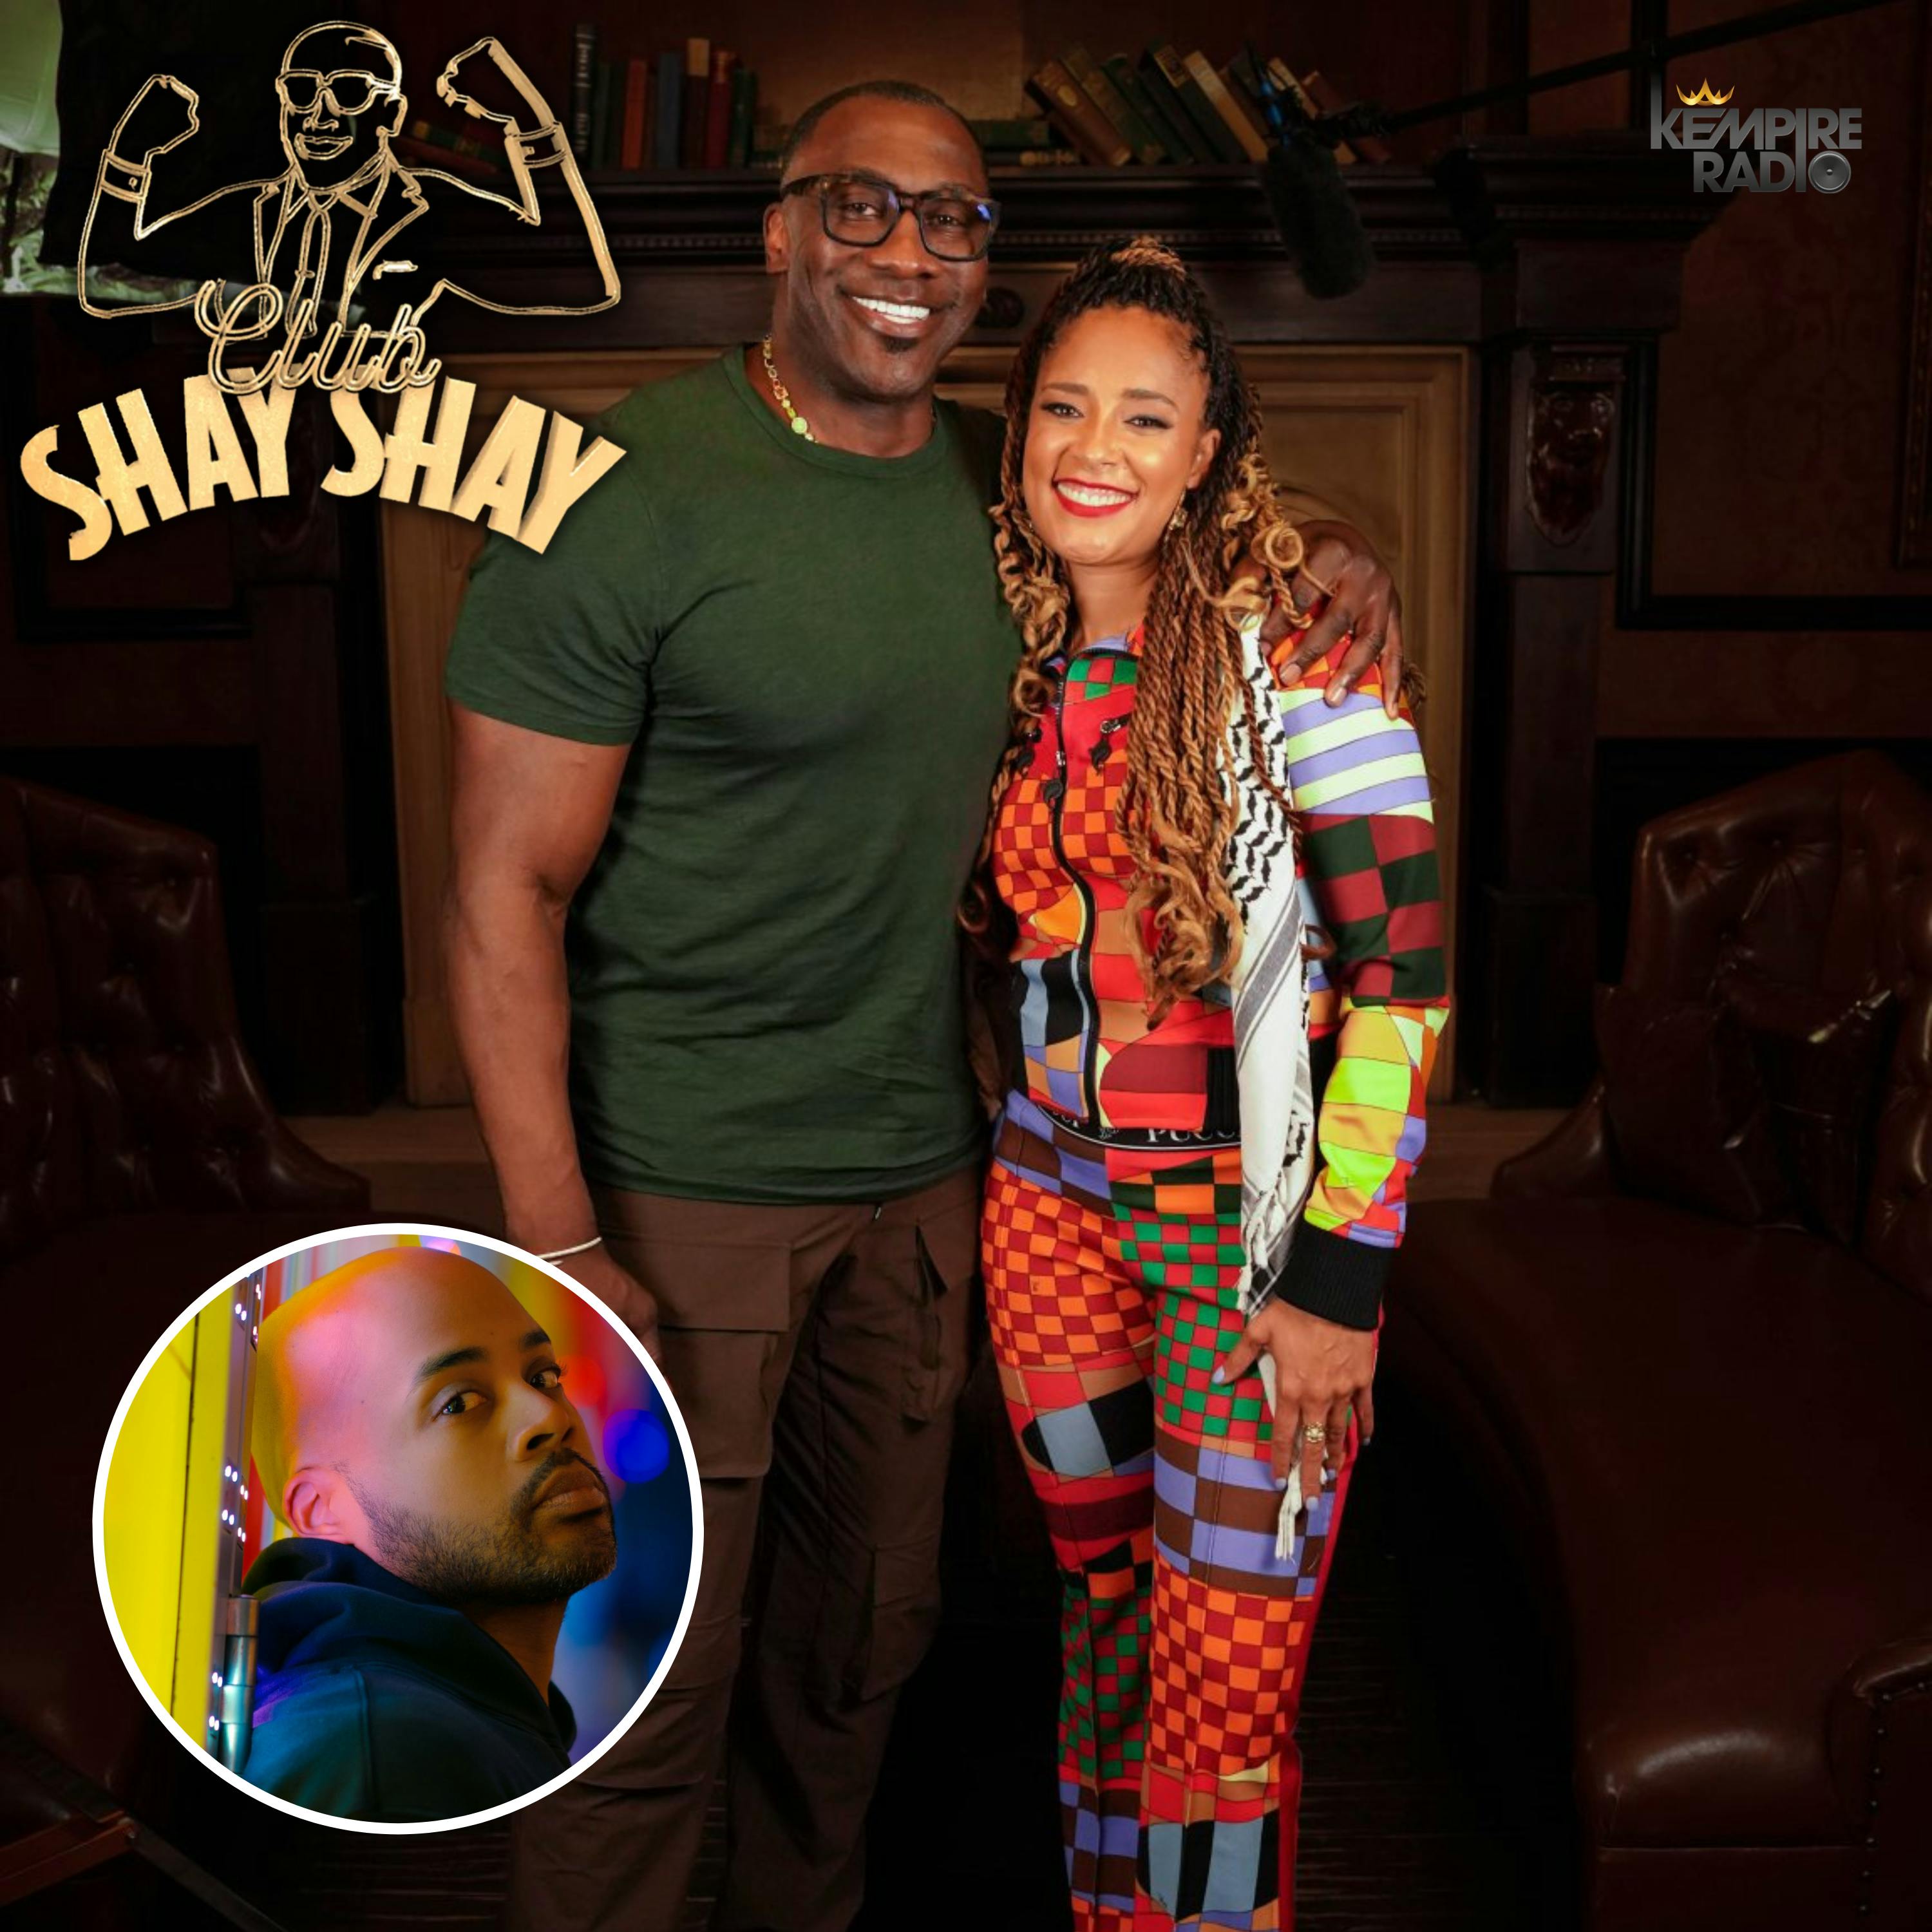 Amanda Seales TELLS ALL on Issa Rae, Black Media, Floetry & More in Club Shay Shay Interview